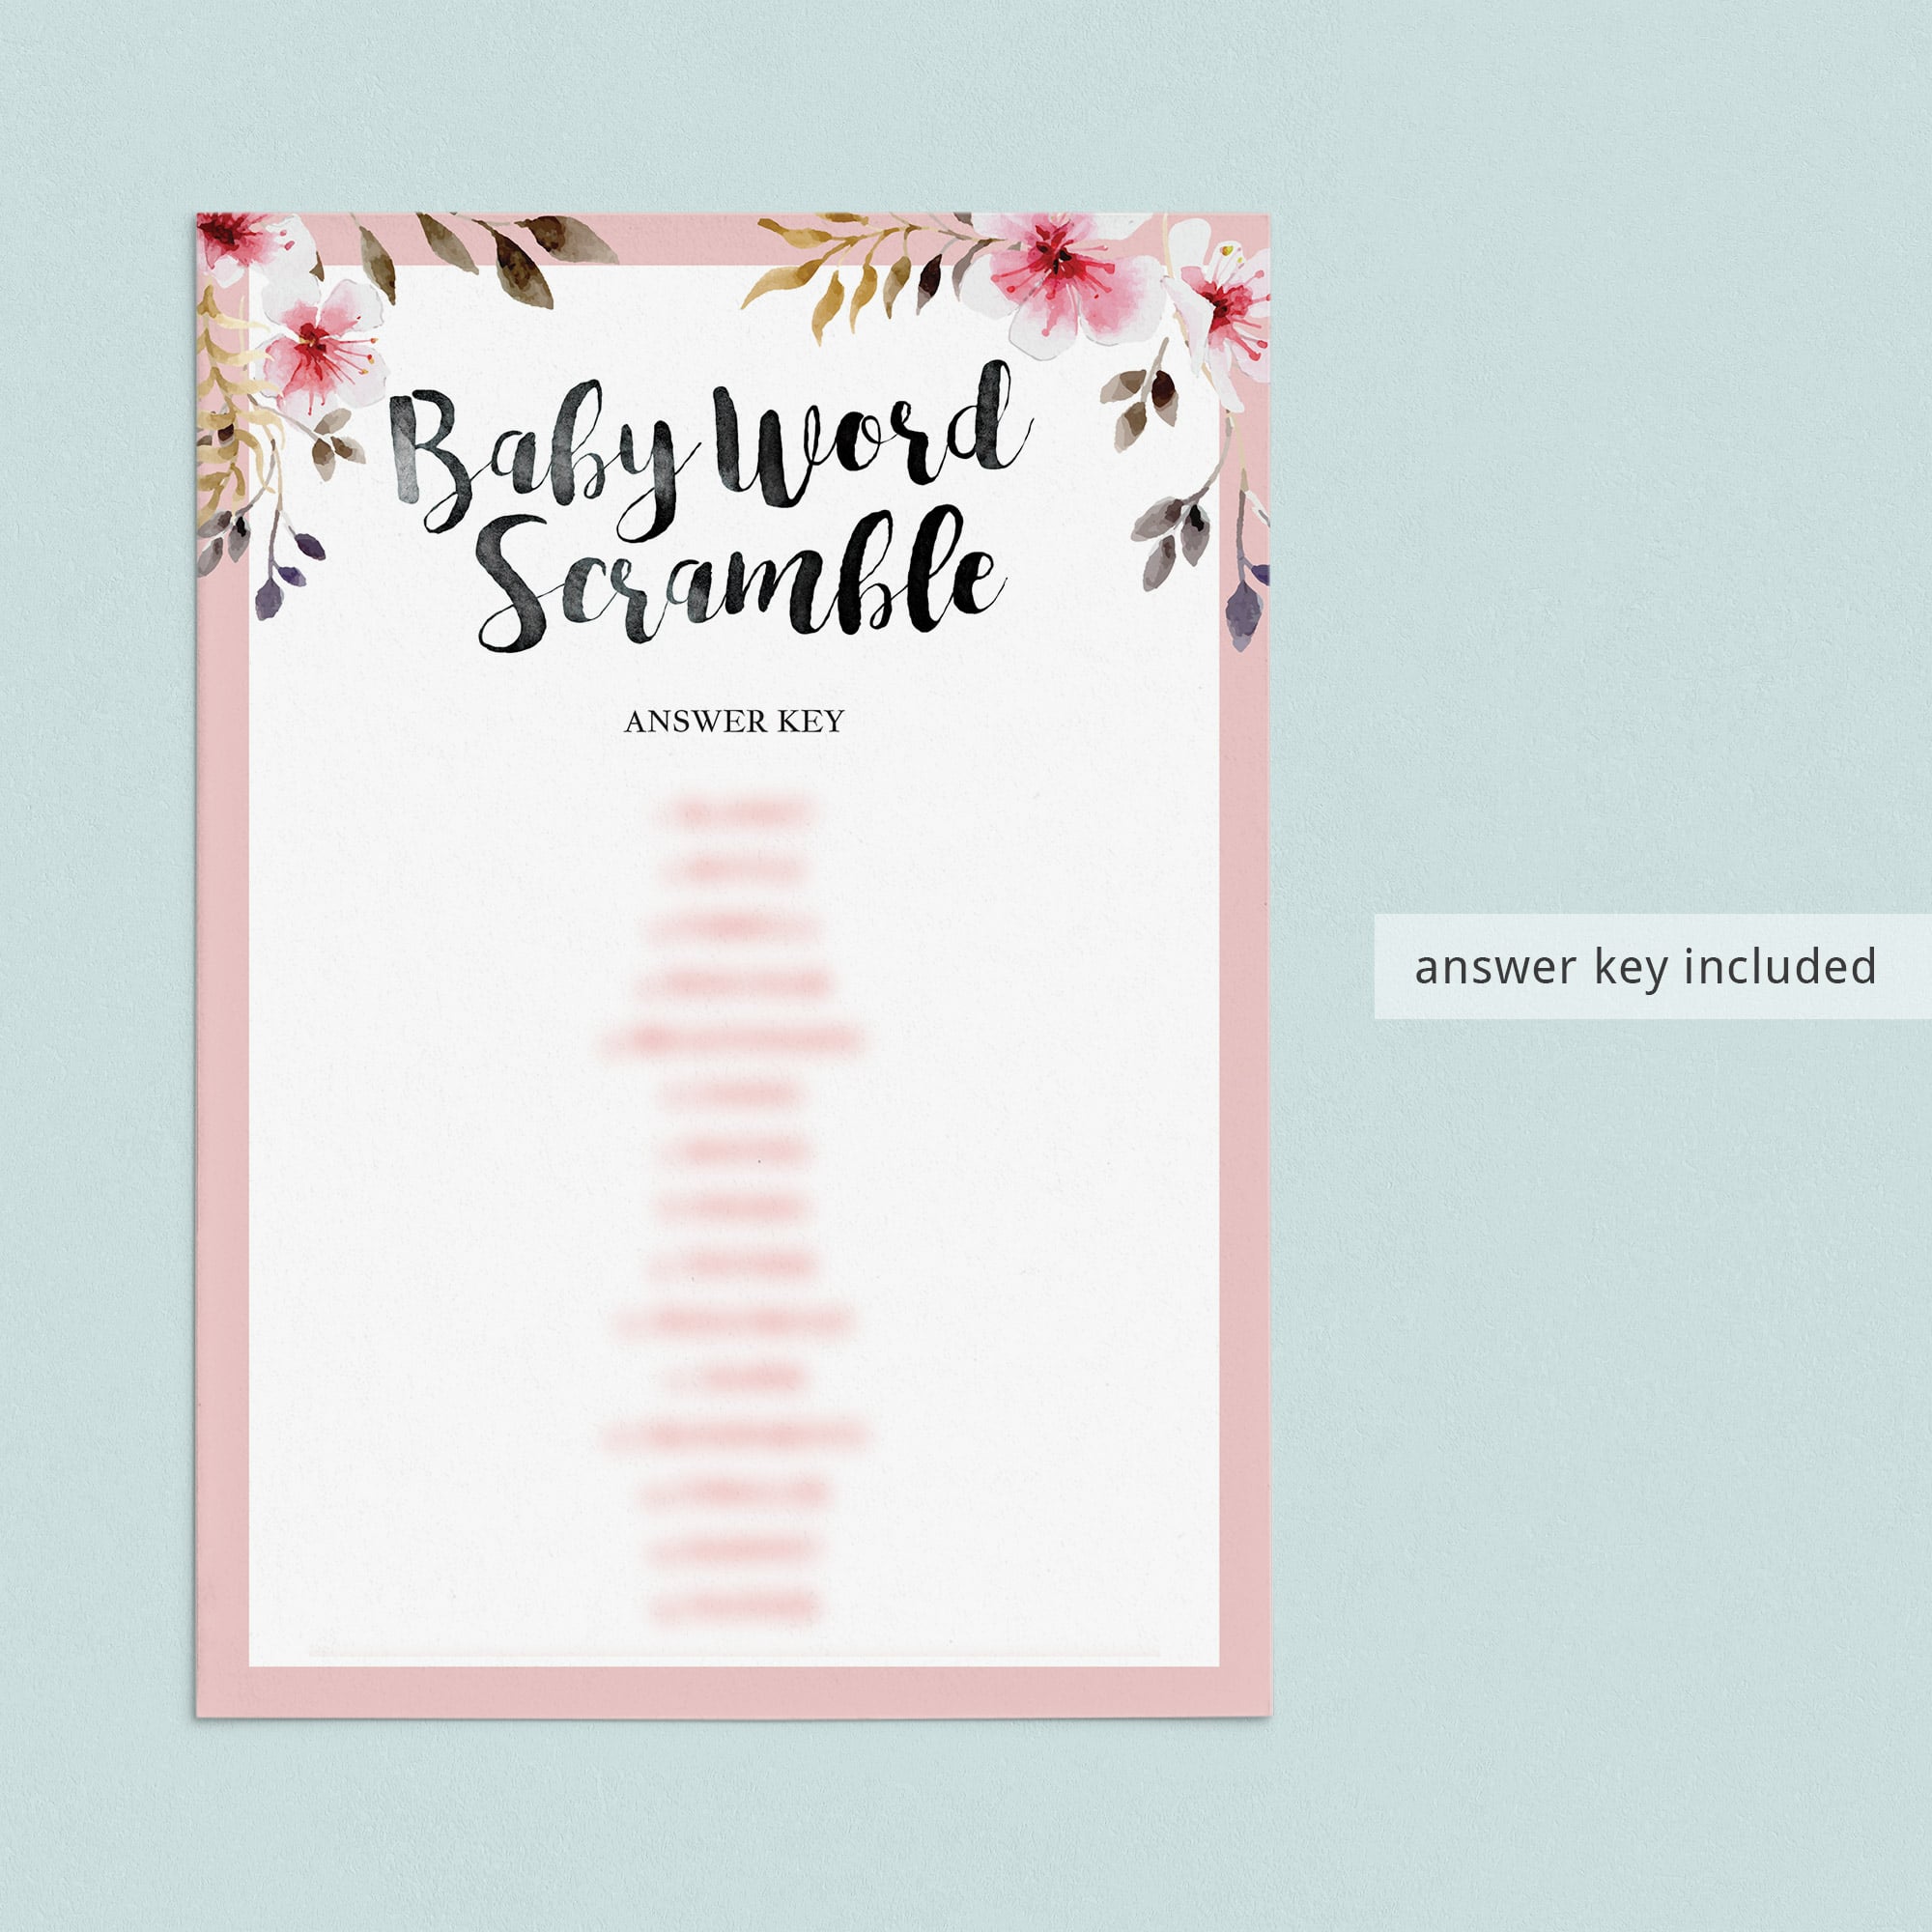 Download girl baby shower games blush pink baby word scramble by LittleSizzle